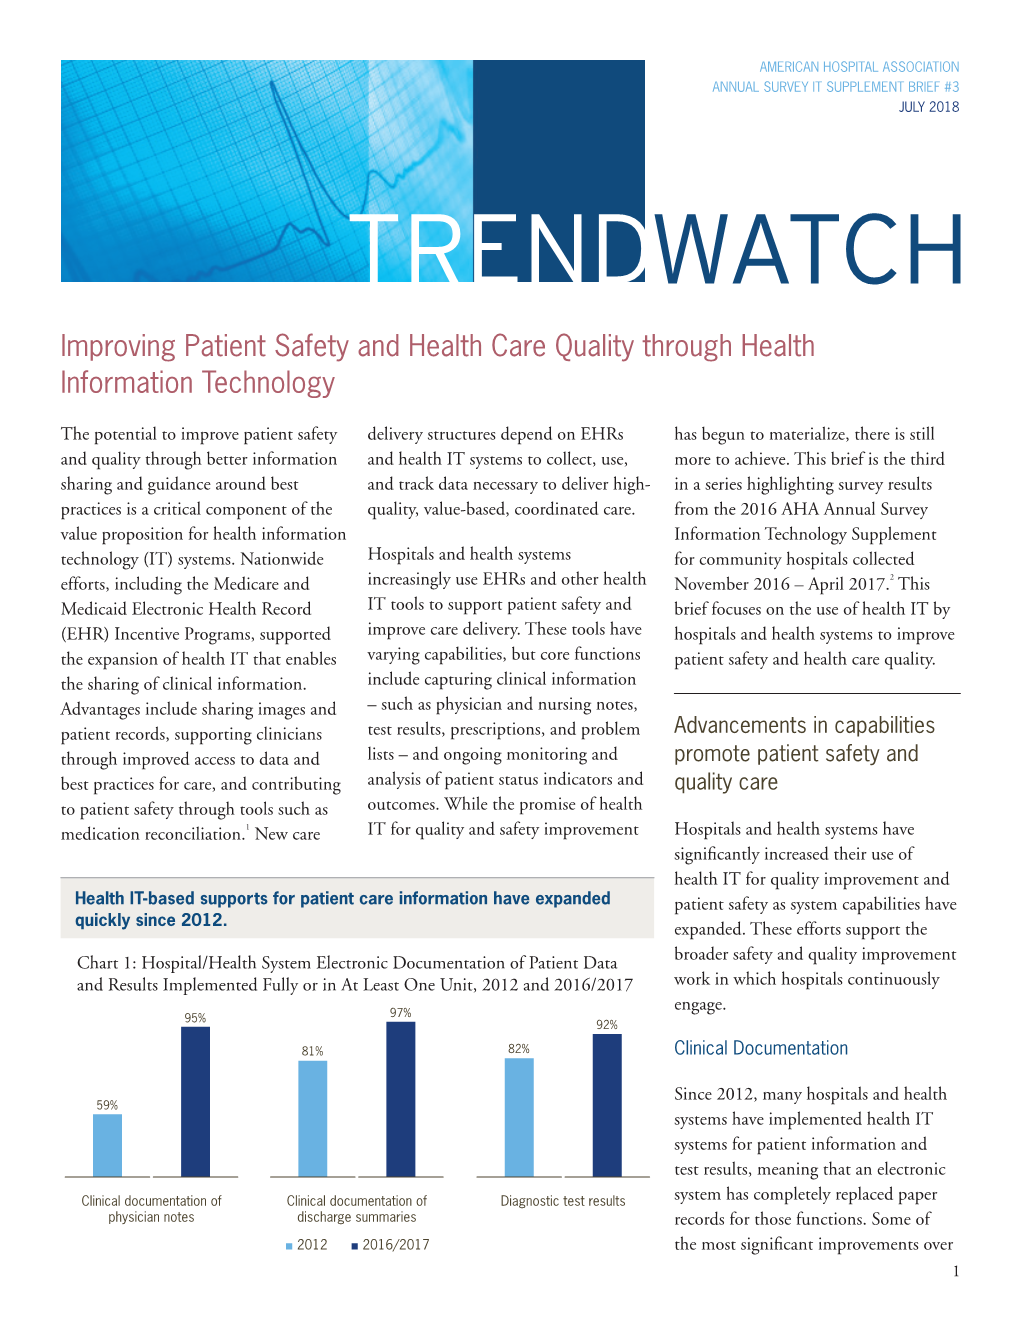 Improving Patient Safety and Health Care Quality Through Health Information Technology